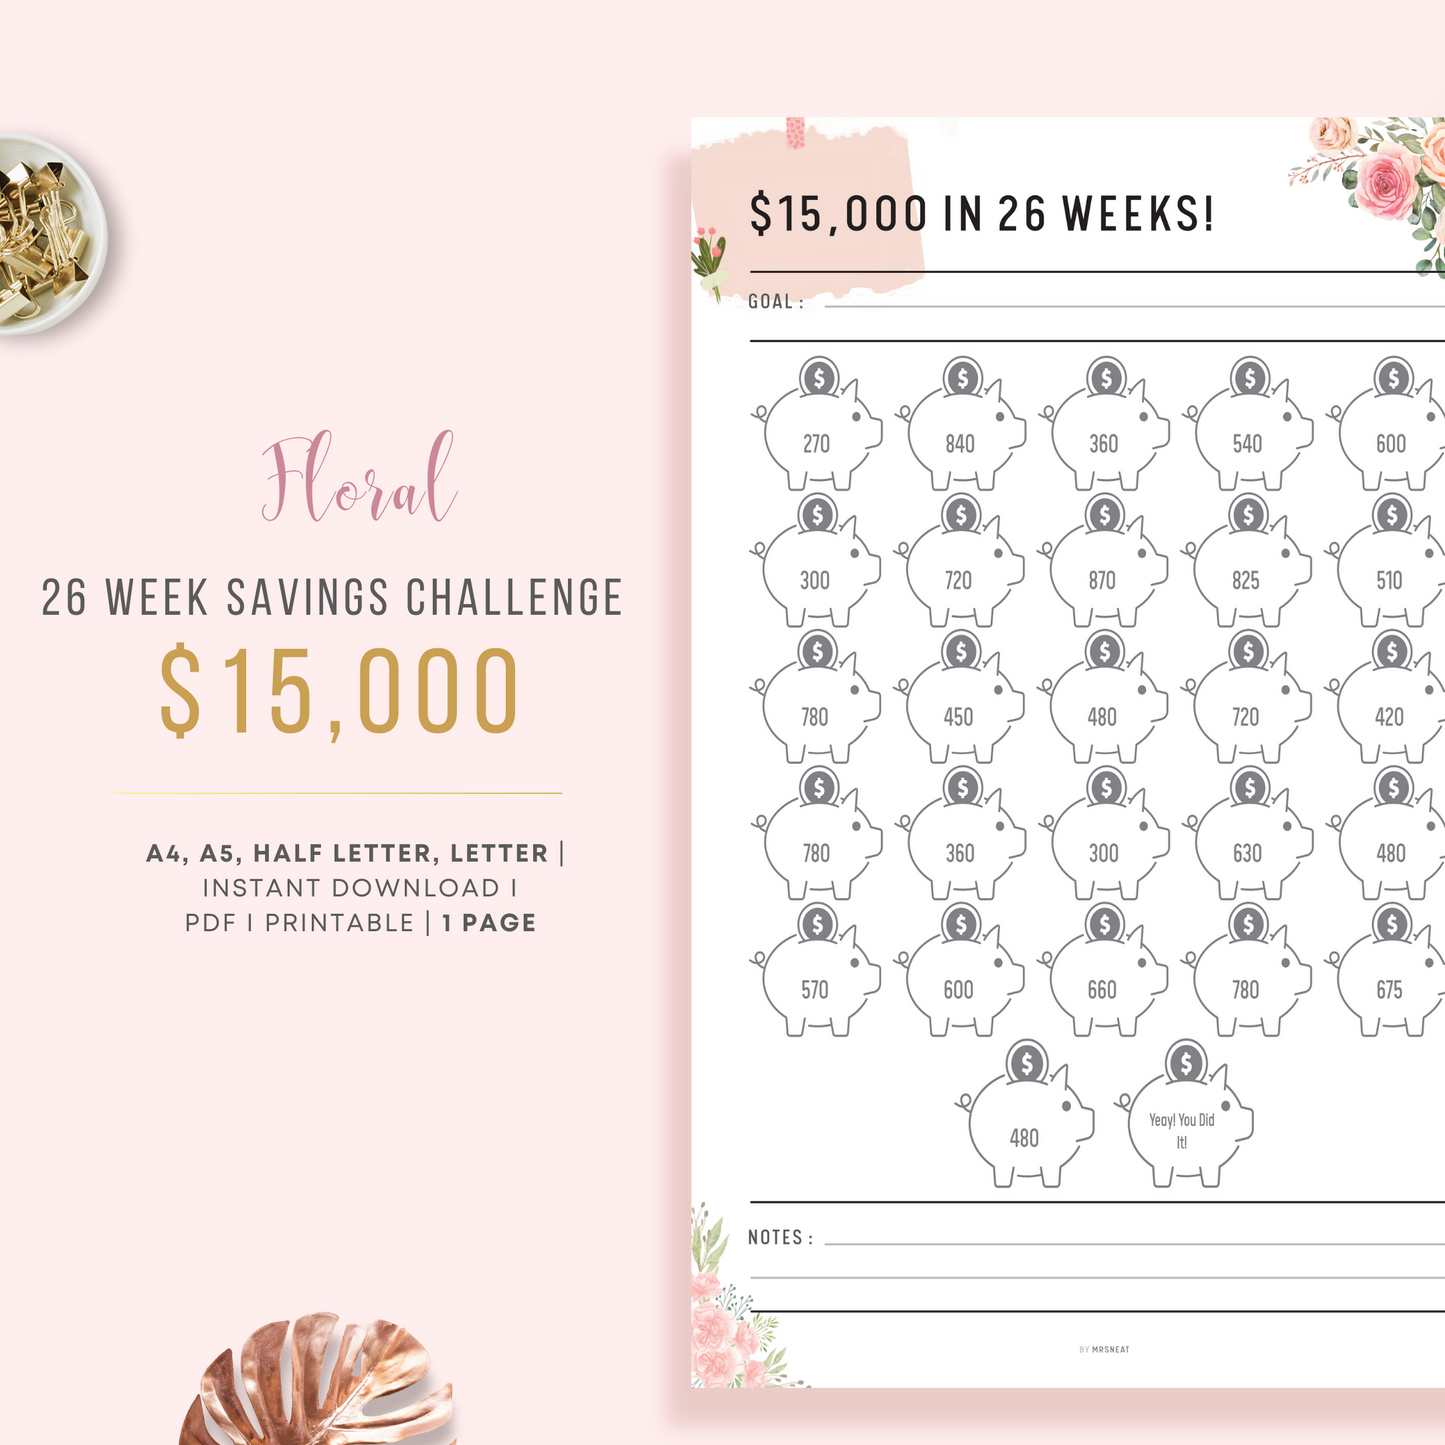 $15,000 Savings Challenge in 26 Weeks Planner with room for goal and notes in Floral Theme